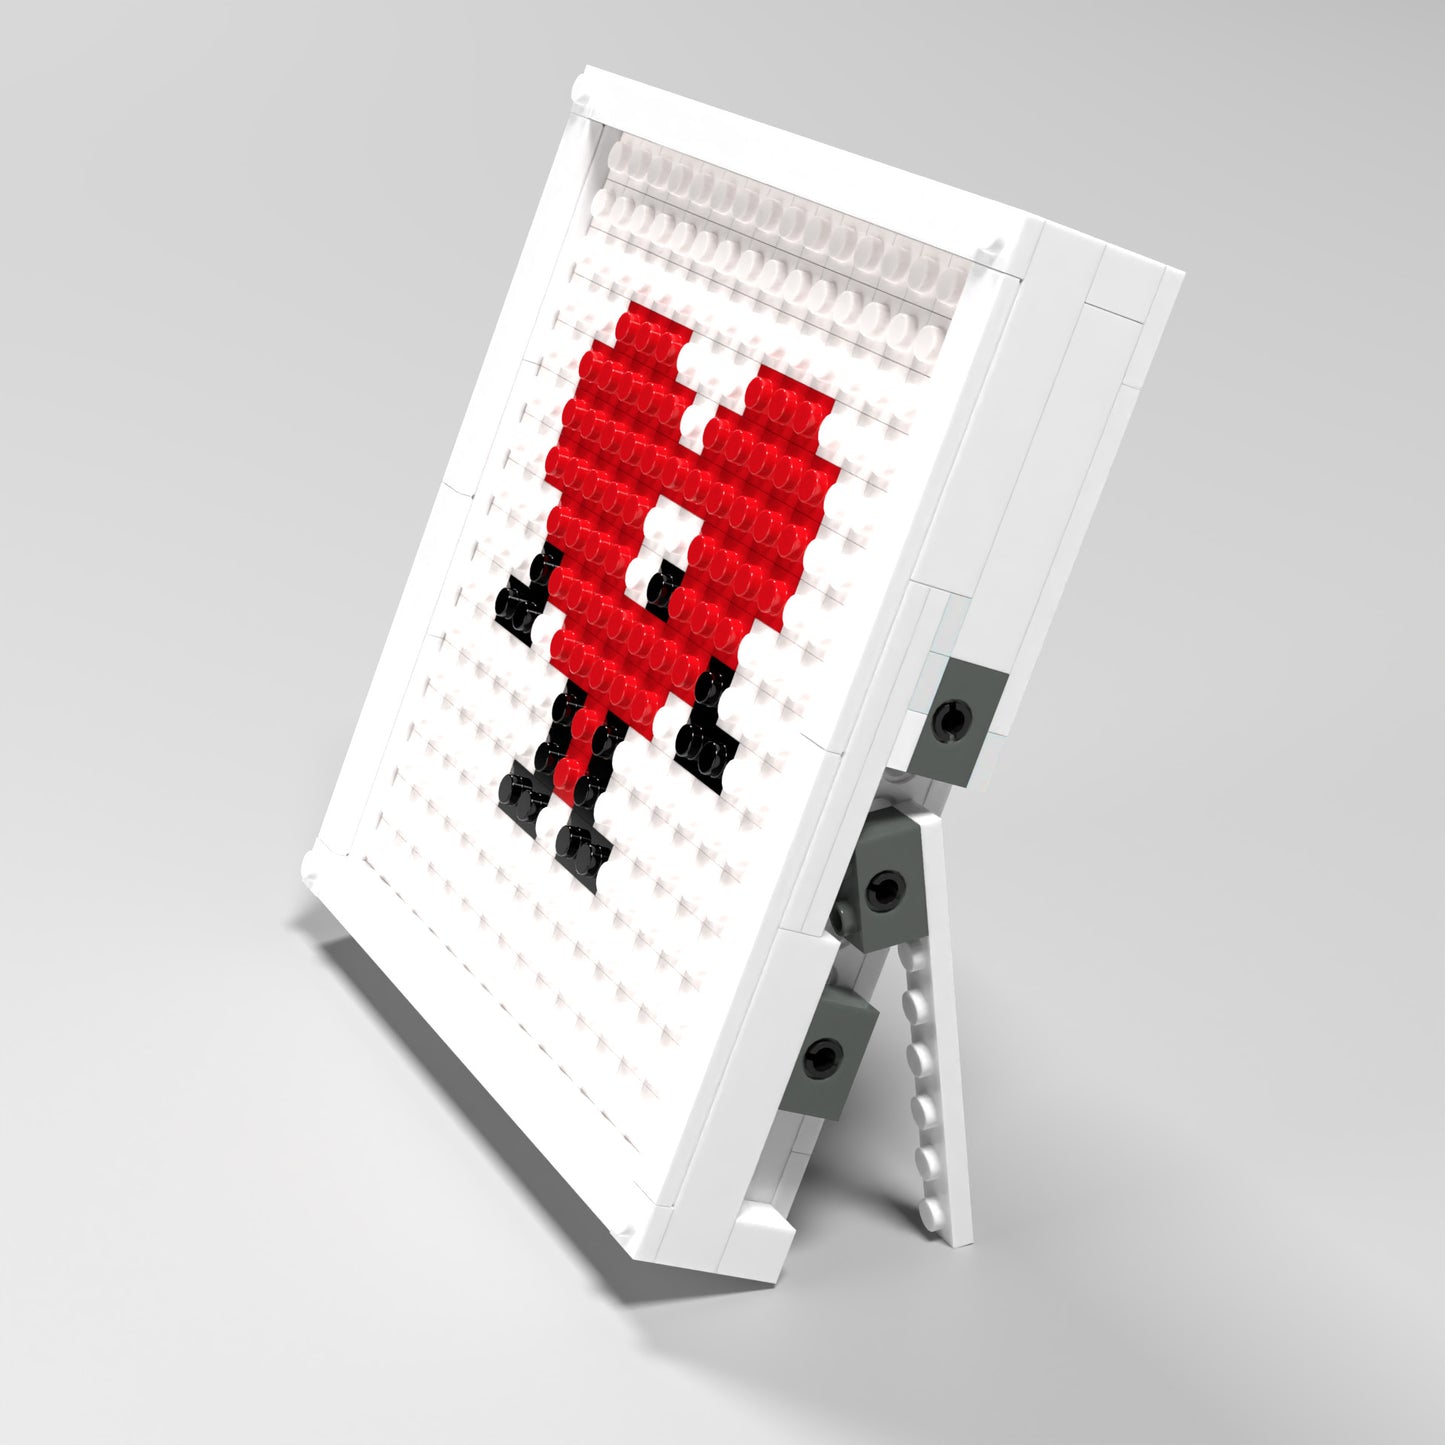 Pixel Art of Love Fairy Compatible Lego Set - A Heartwarming Decoration to Spread Love